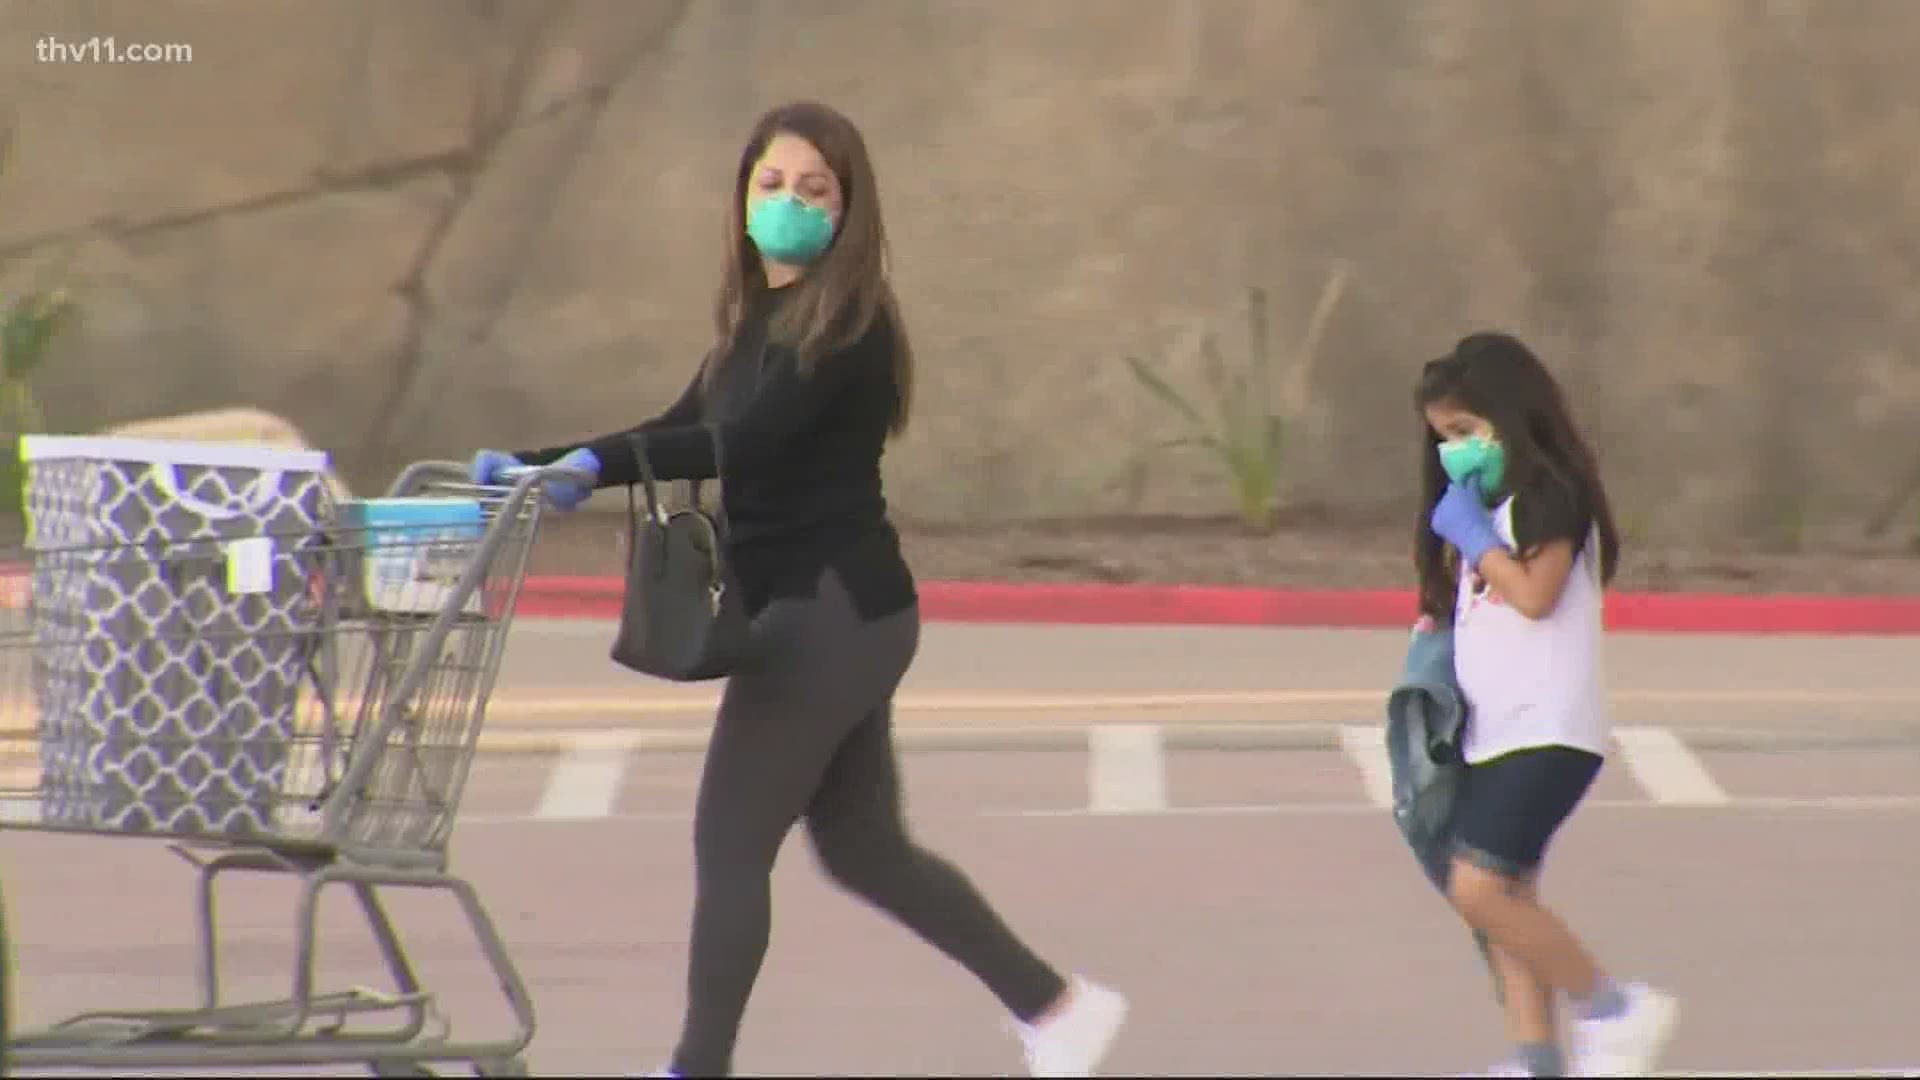 Little Rock issued its executive order requiring people to wear face masks in the city. The order calls for everyone to wear a face covering while in public.